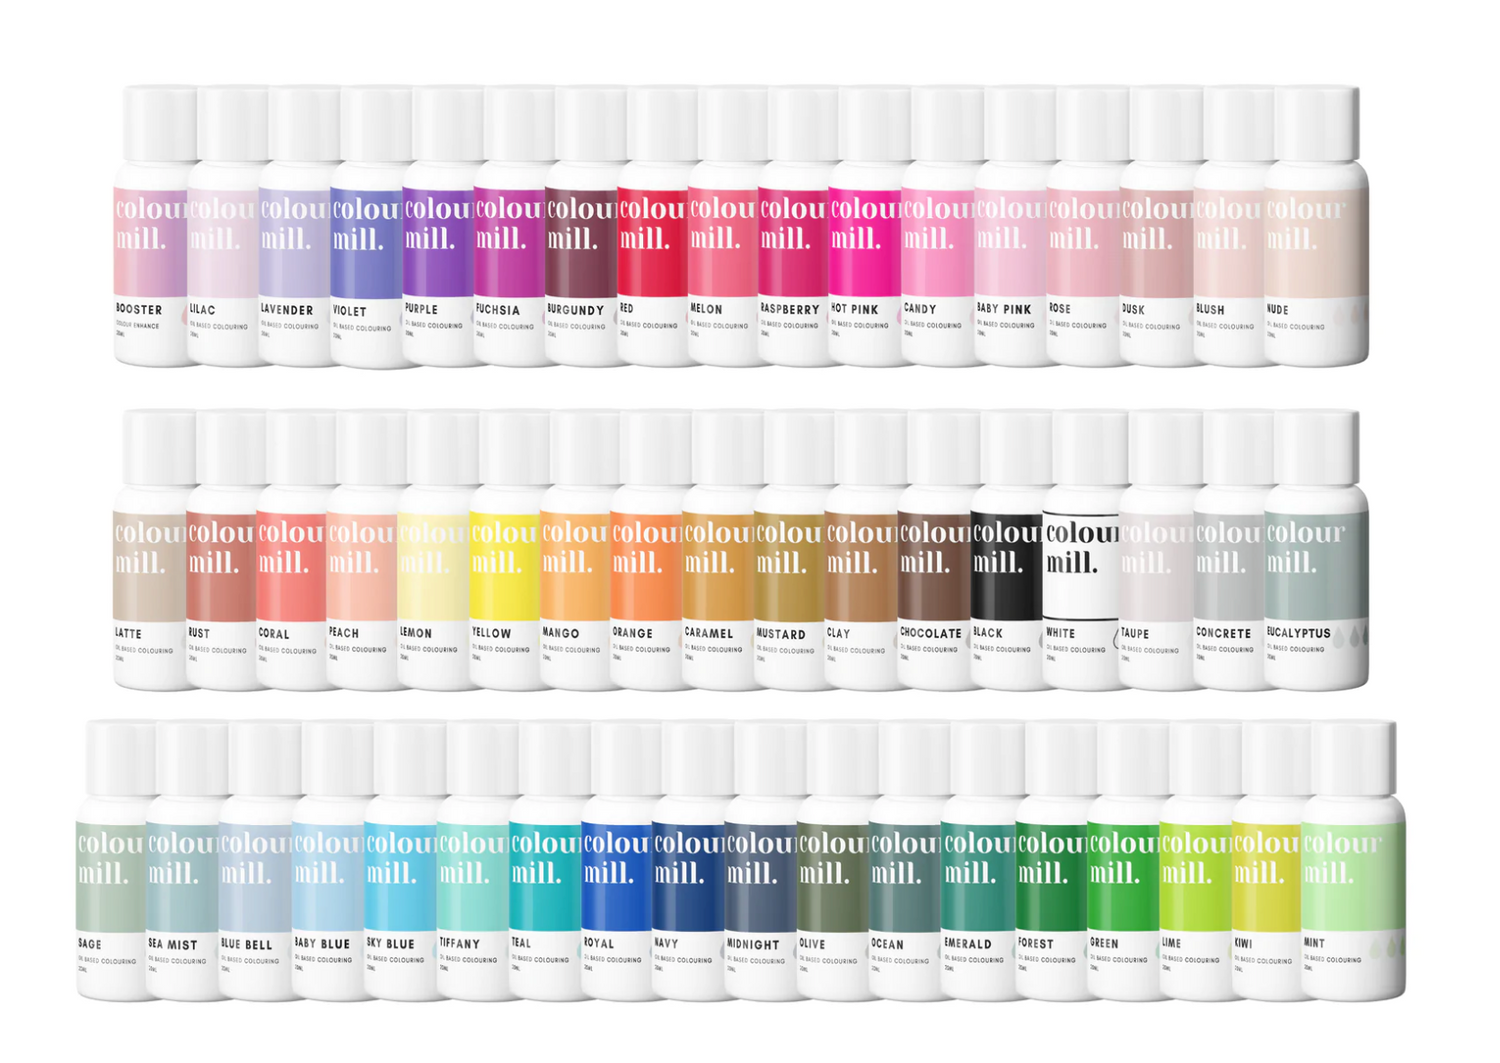 Colour Mill - Oil BlendColoring - All 46 Colors Included - 20 mL each -  Divine Specialties